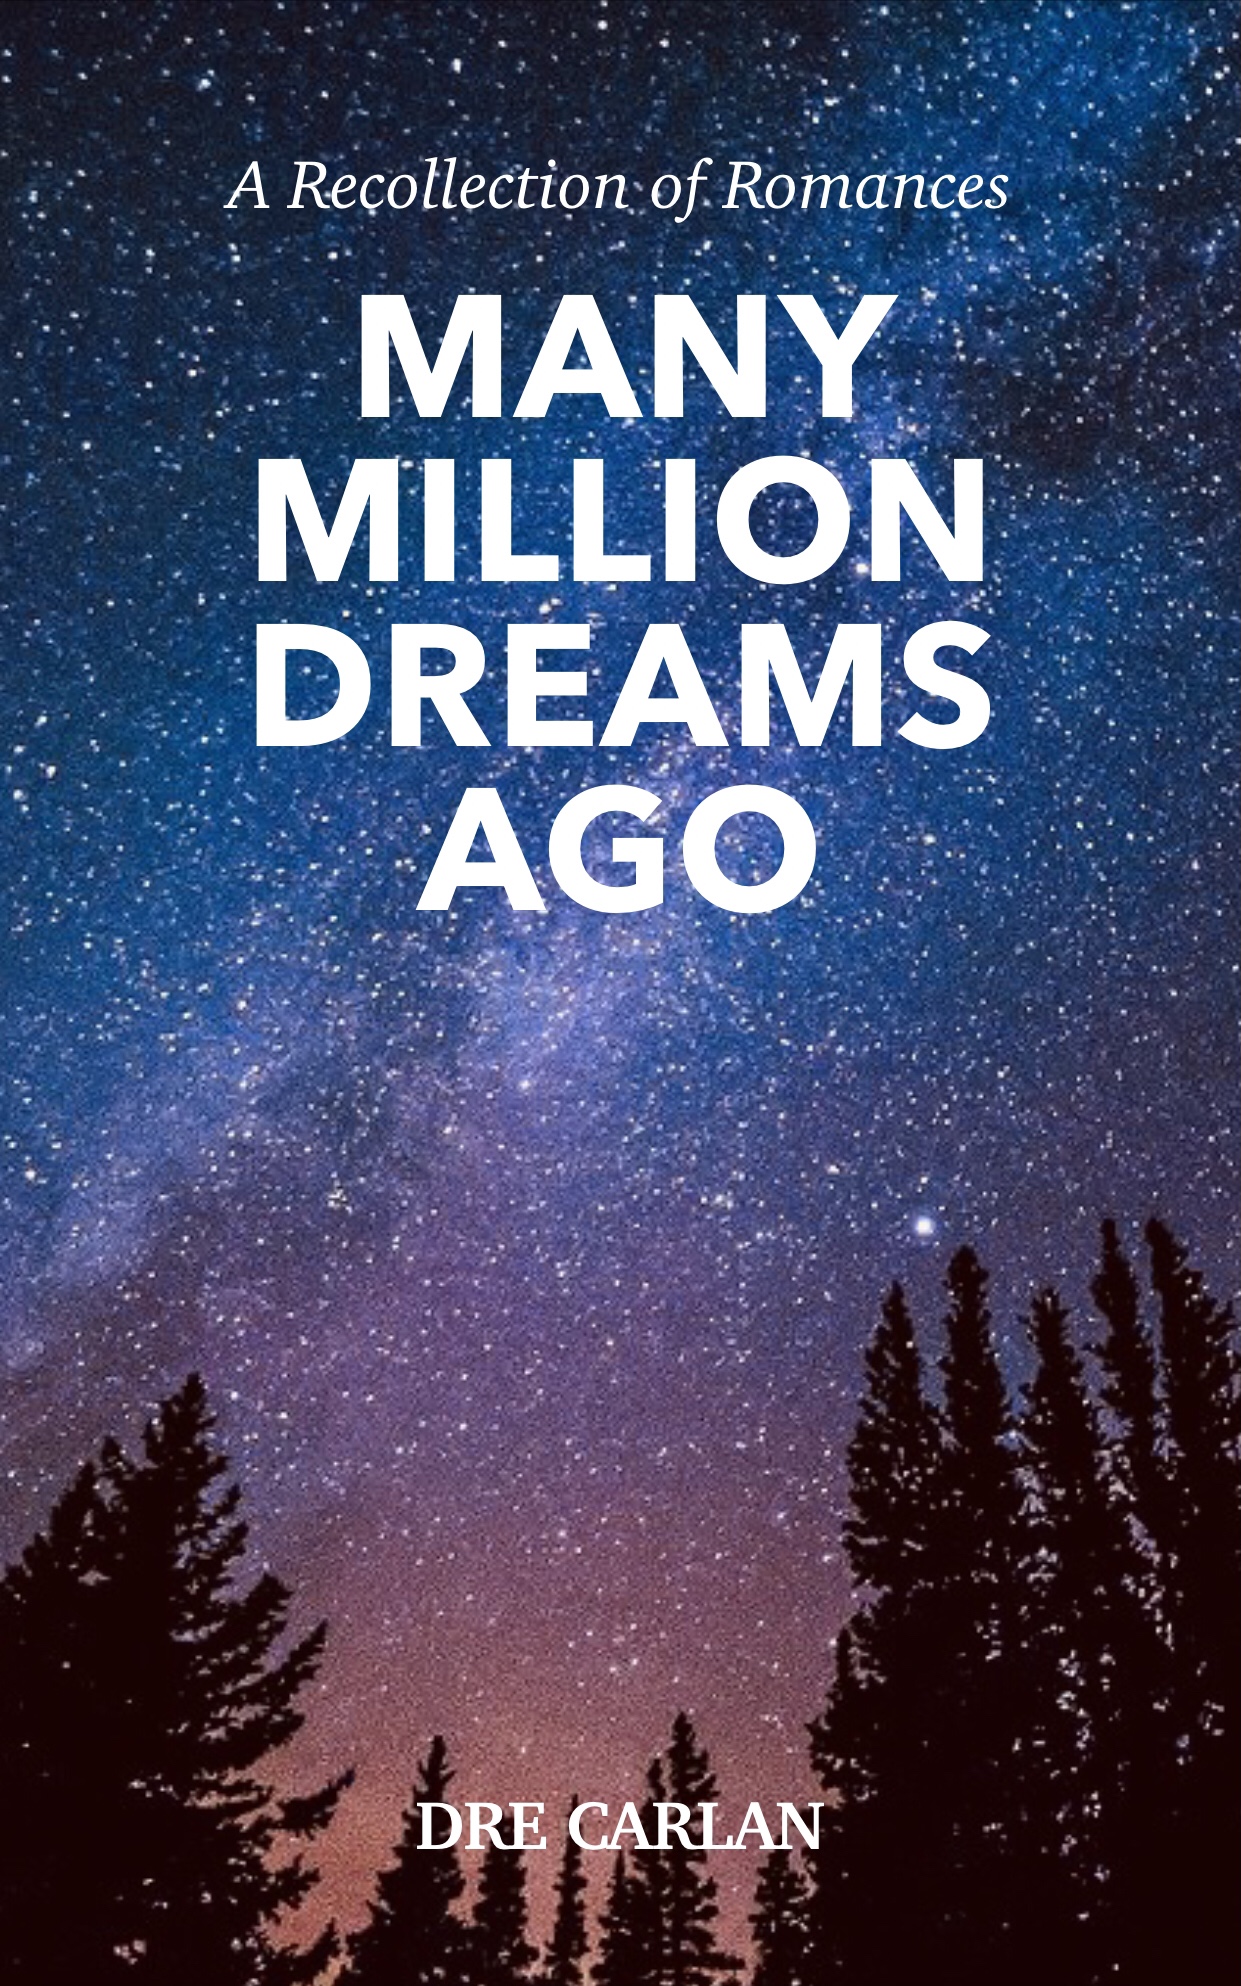 FREE: Many Million Dreams Ago: A Recollection of Romances by Dre Carlan